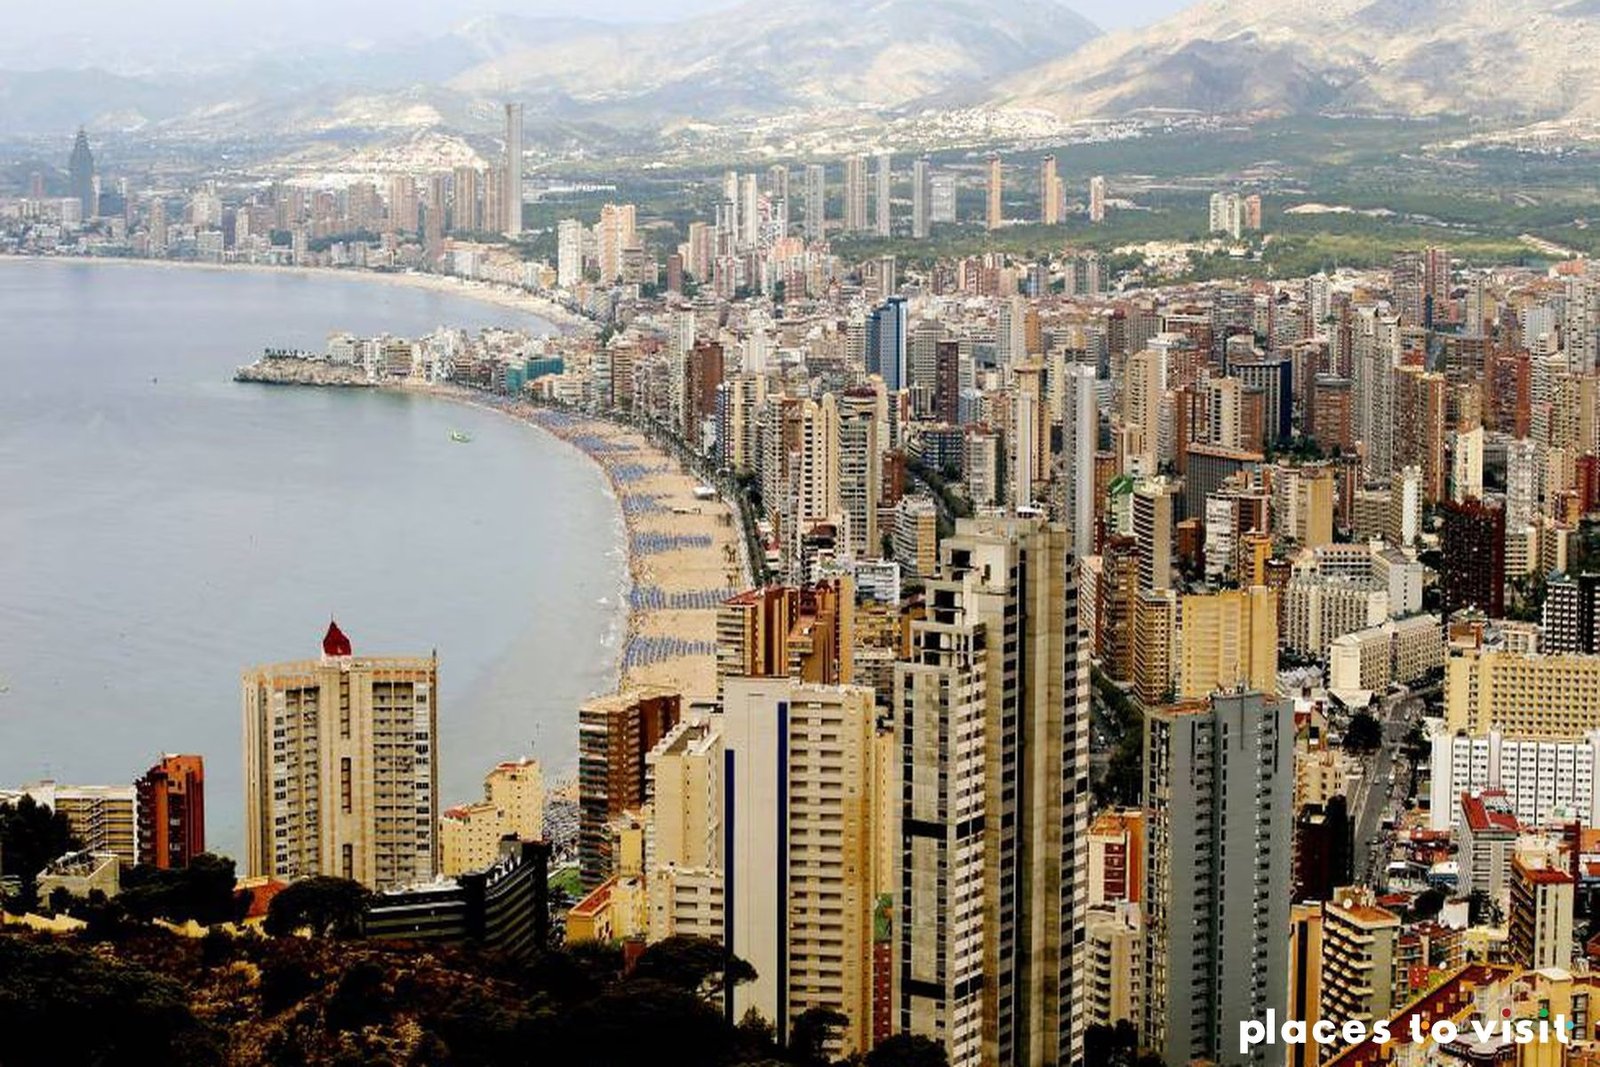 Things to Do in Benidorm